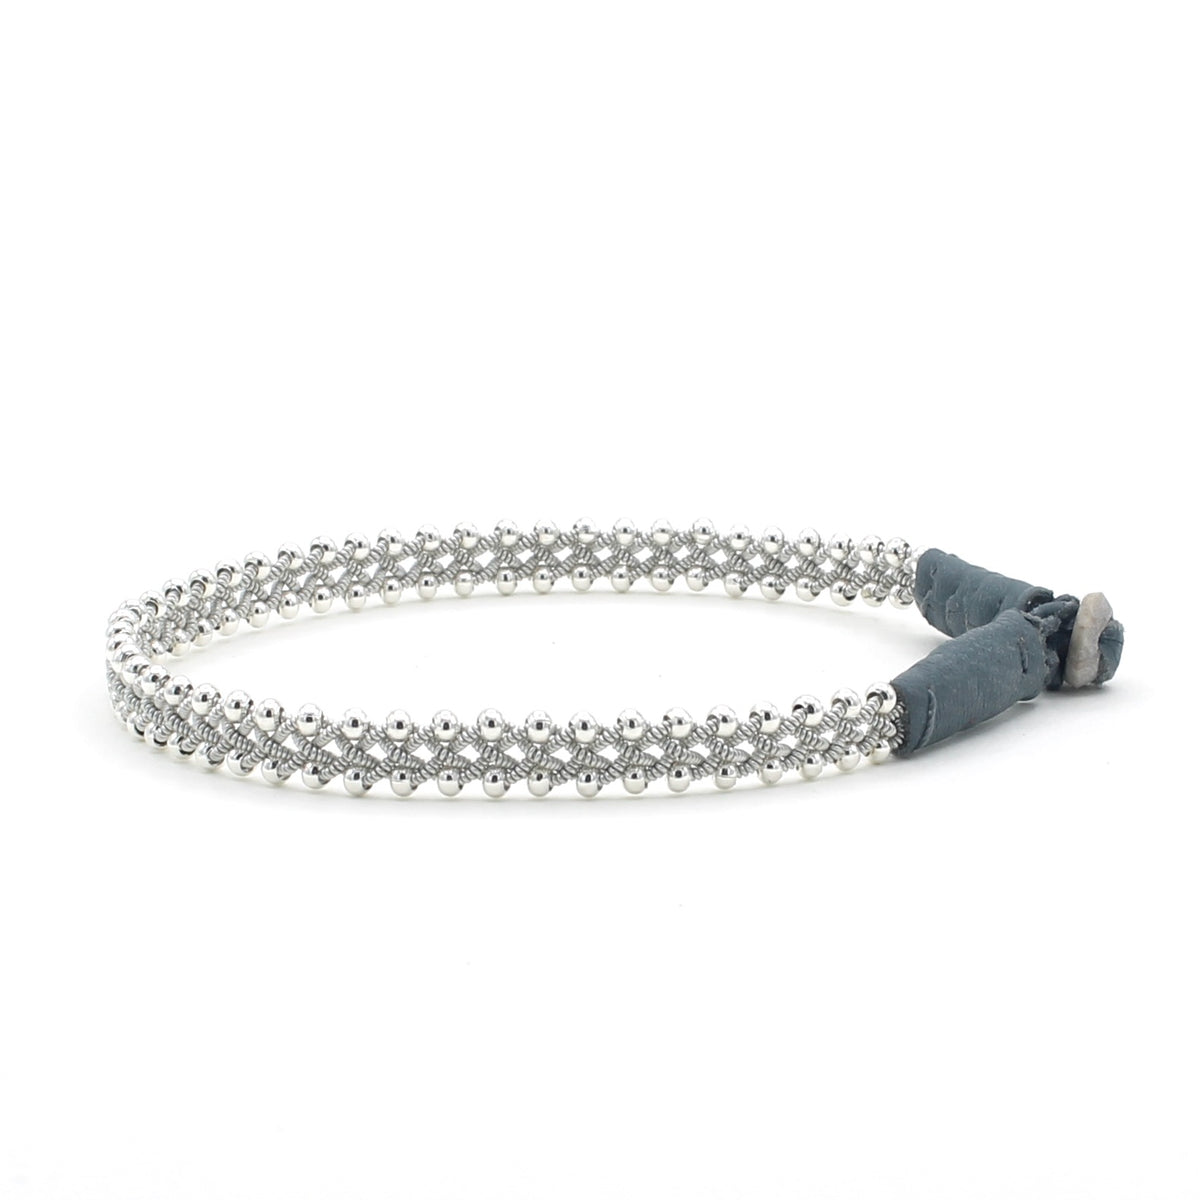 Lucia Narrow Braid with Silver Beads